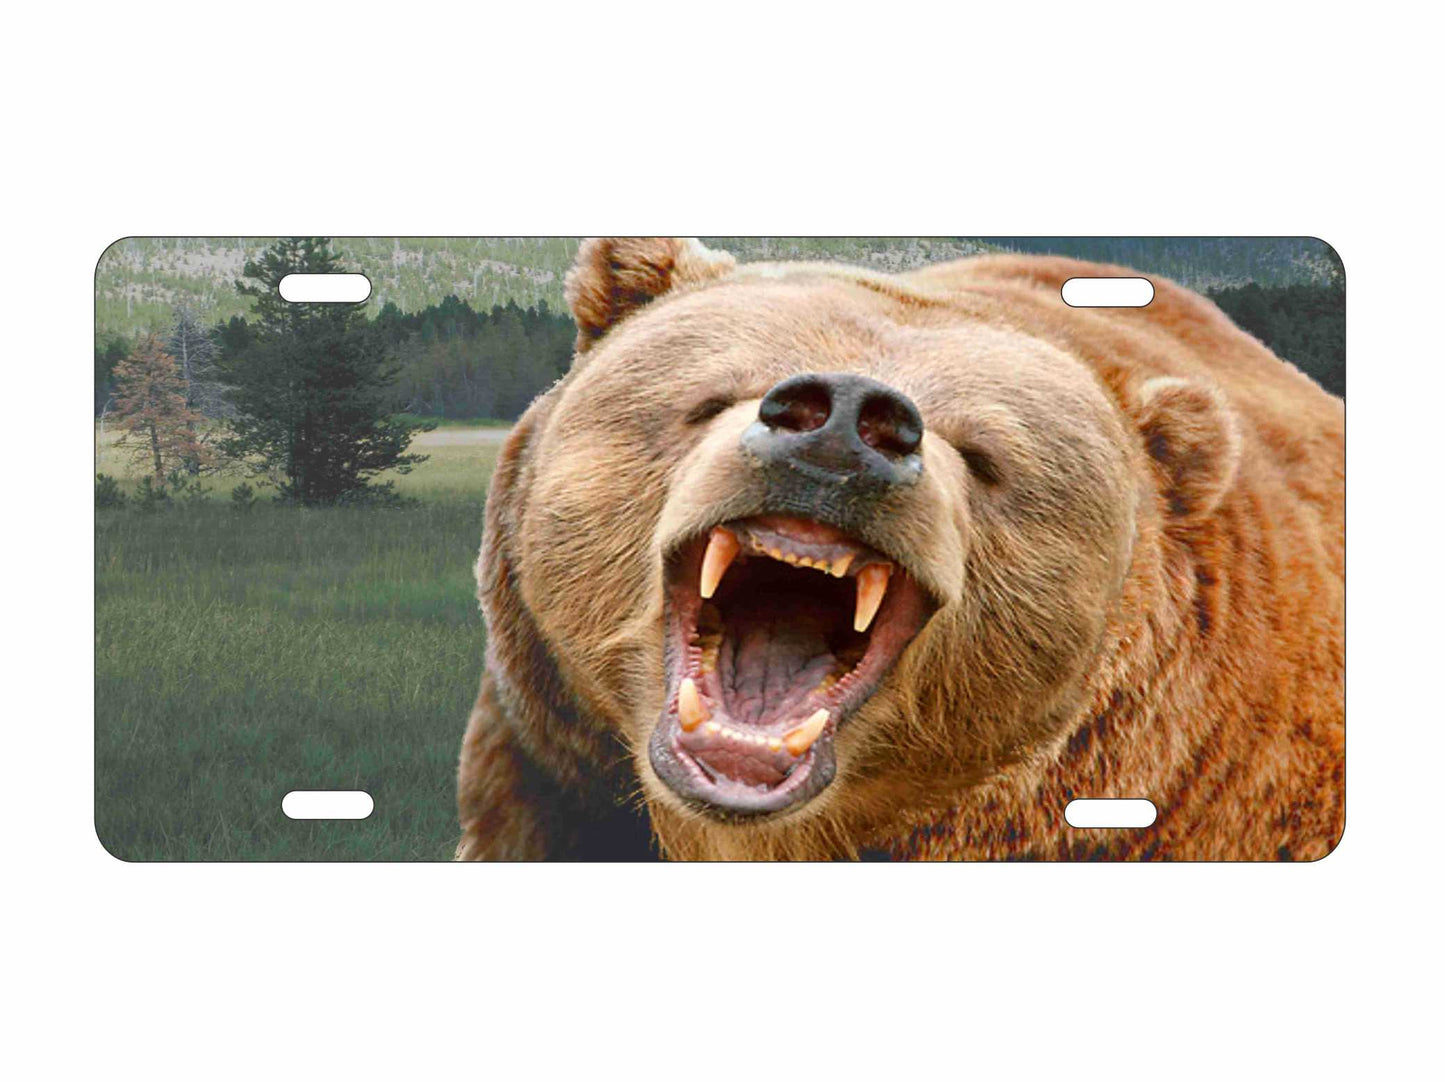 Grizzly bear personalized novelty front license plate decorative custom vanity car tag